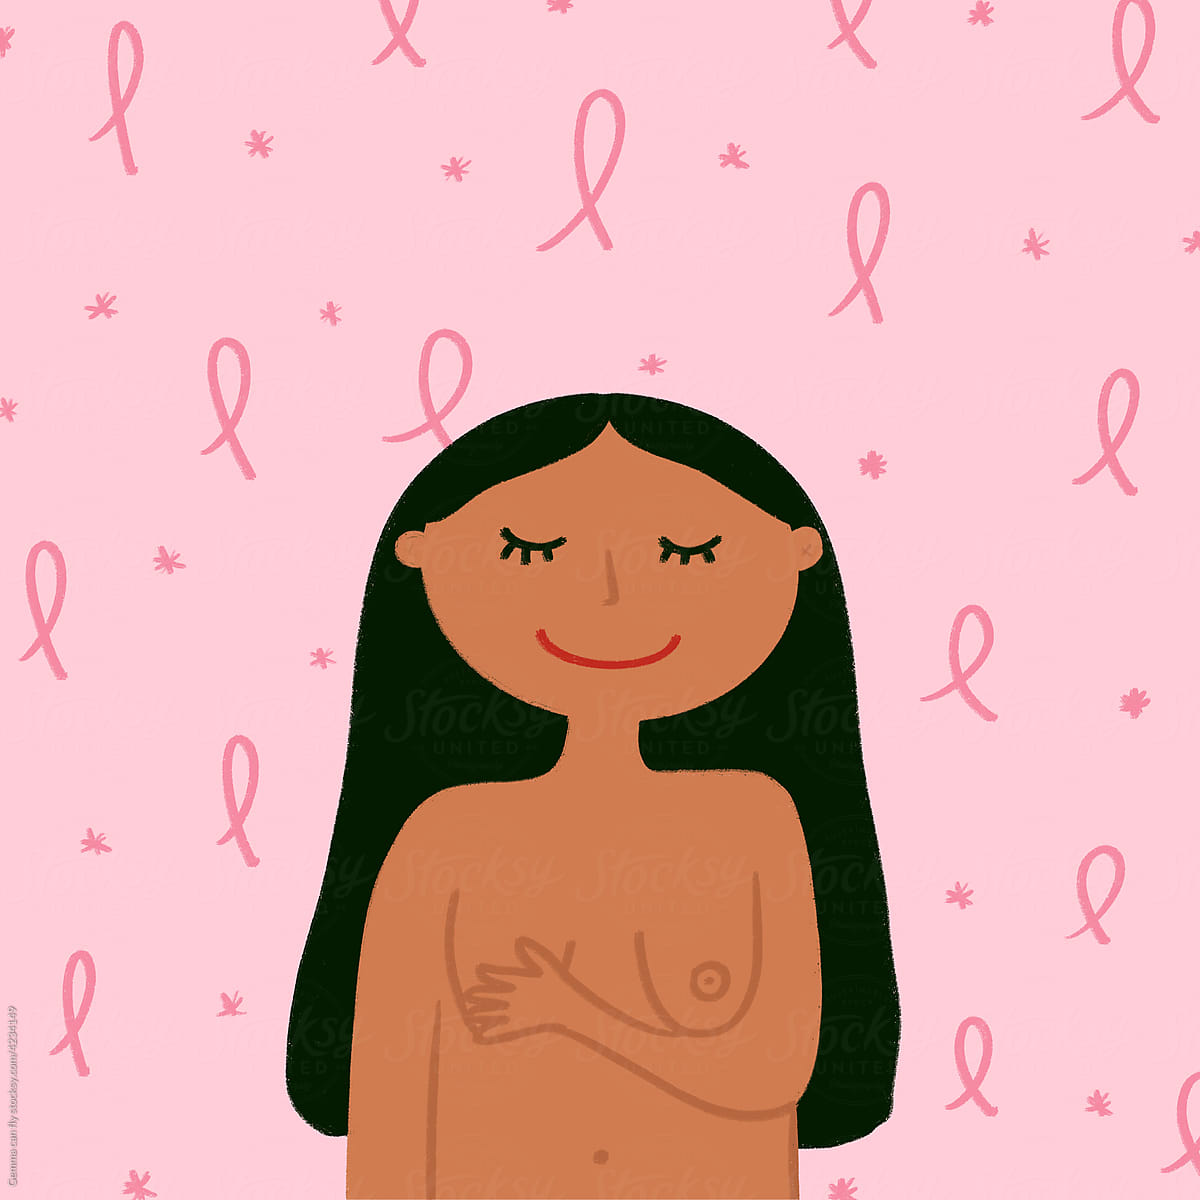 Woman breast cancer prevention illustration